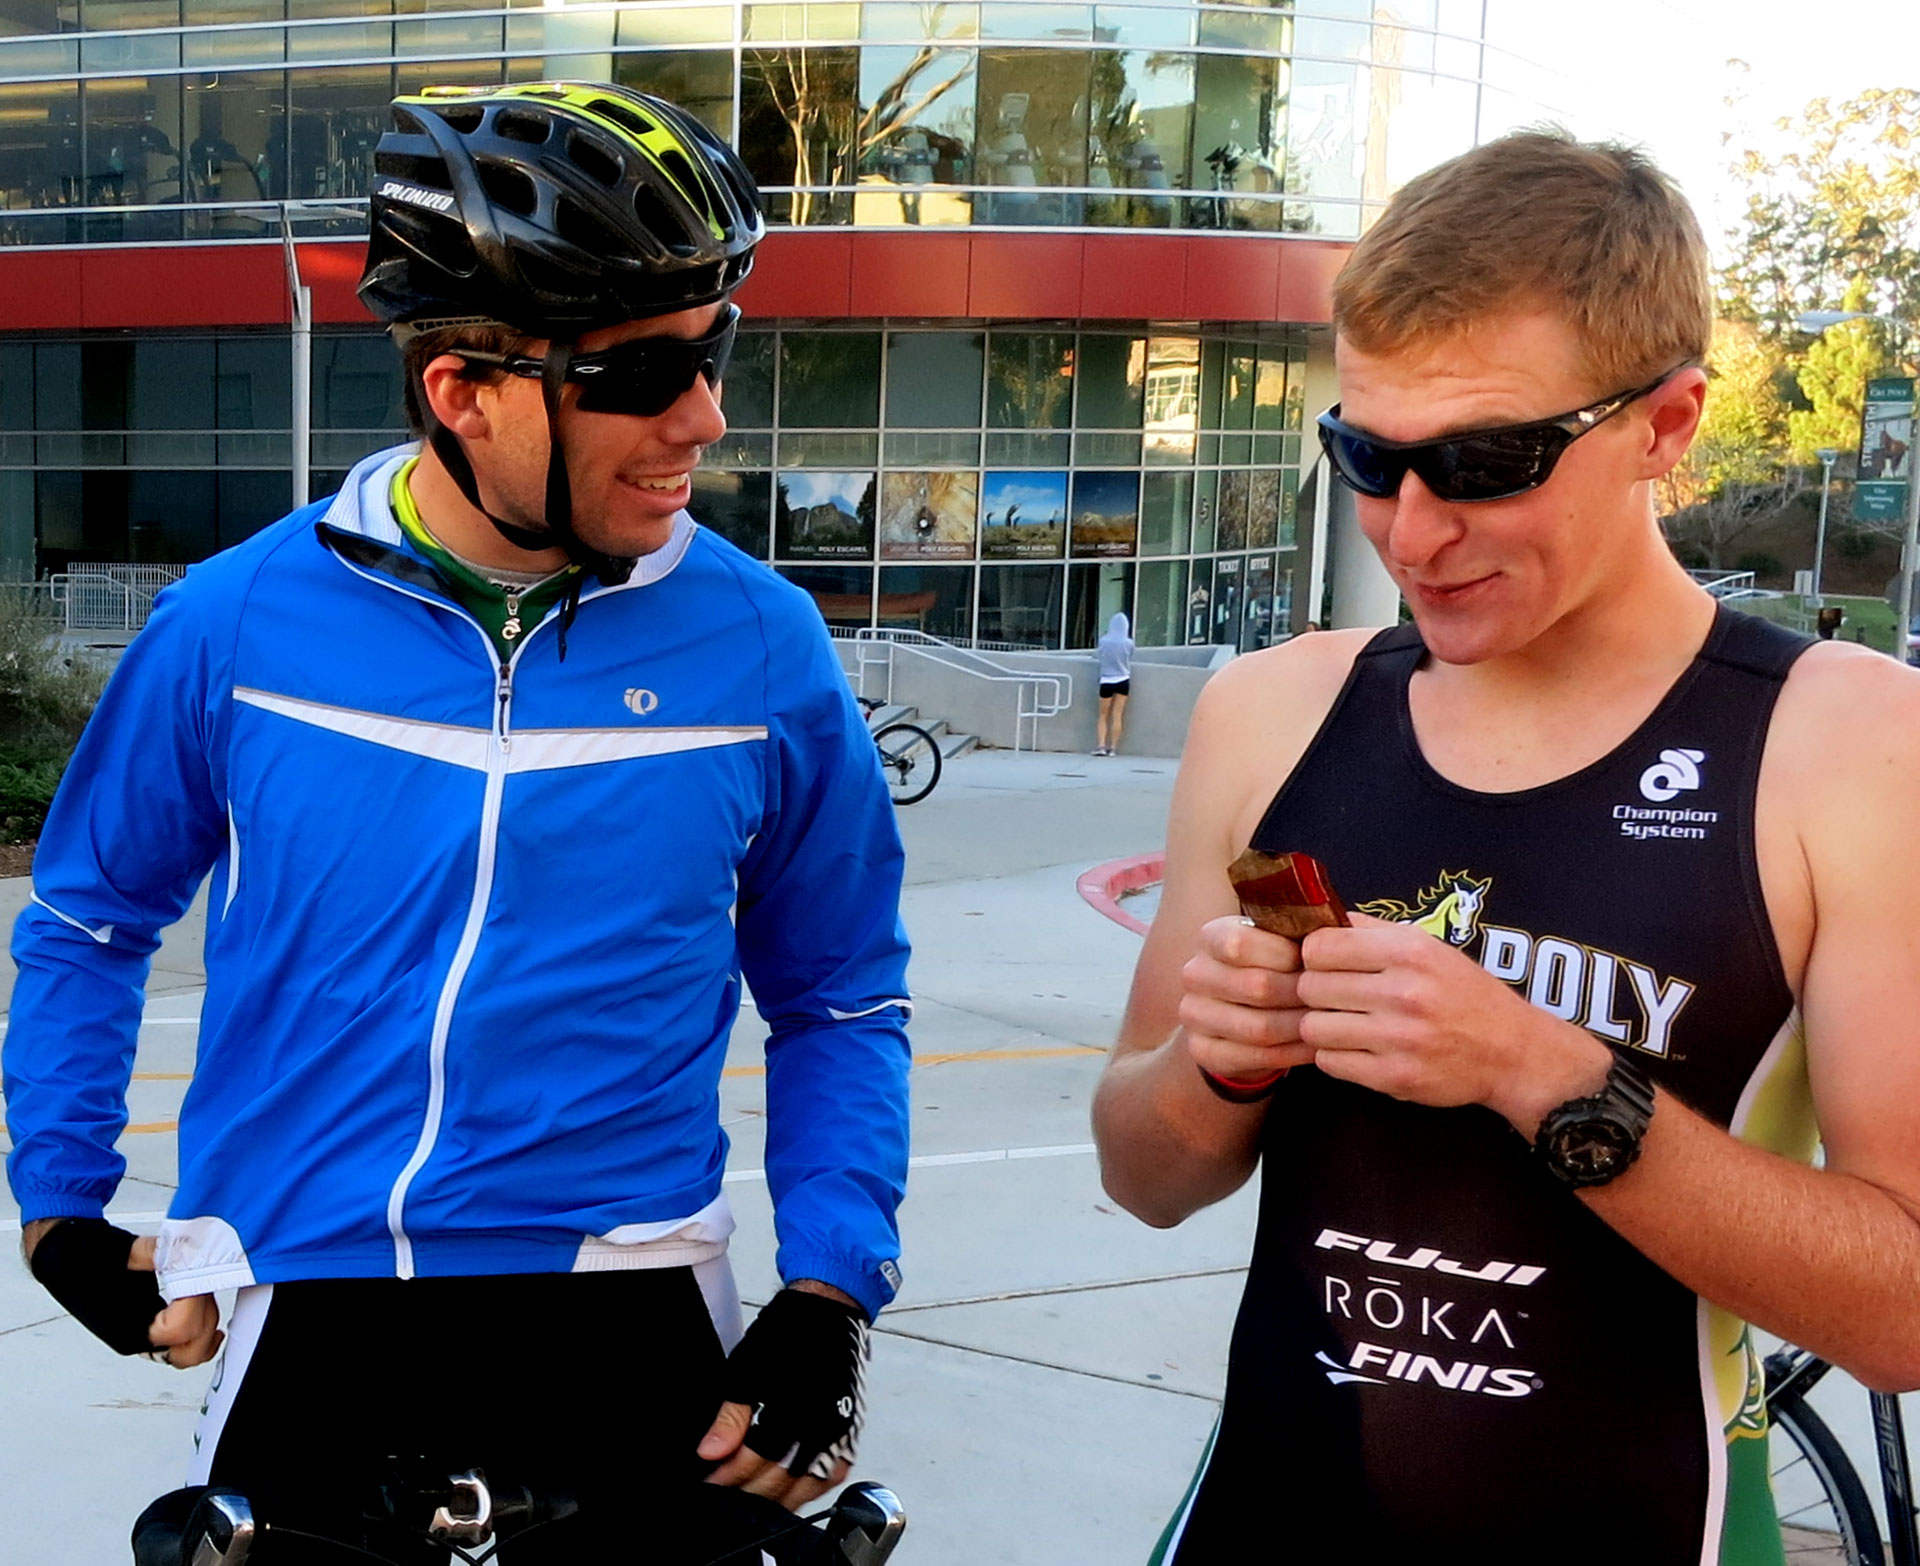 Sean Sullivan, at left, a third-year biology major and the student bike coach, chats with Isaac Blundell, a second-year aerospace engineering major, as he powers up in preparation for the race.  Blundell achieved the fastest bike time of the day, despite losing one of his handlebars within the first 500 feet of the ride.  Equipment malfunctions are one of the triathlete’s worst fears: “Having your equipment not functioning properly can be very frustrating, and focusing on it too much can be detrimental to your performance,” says Blundell.